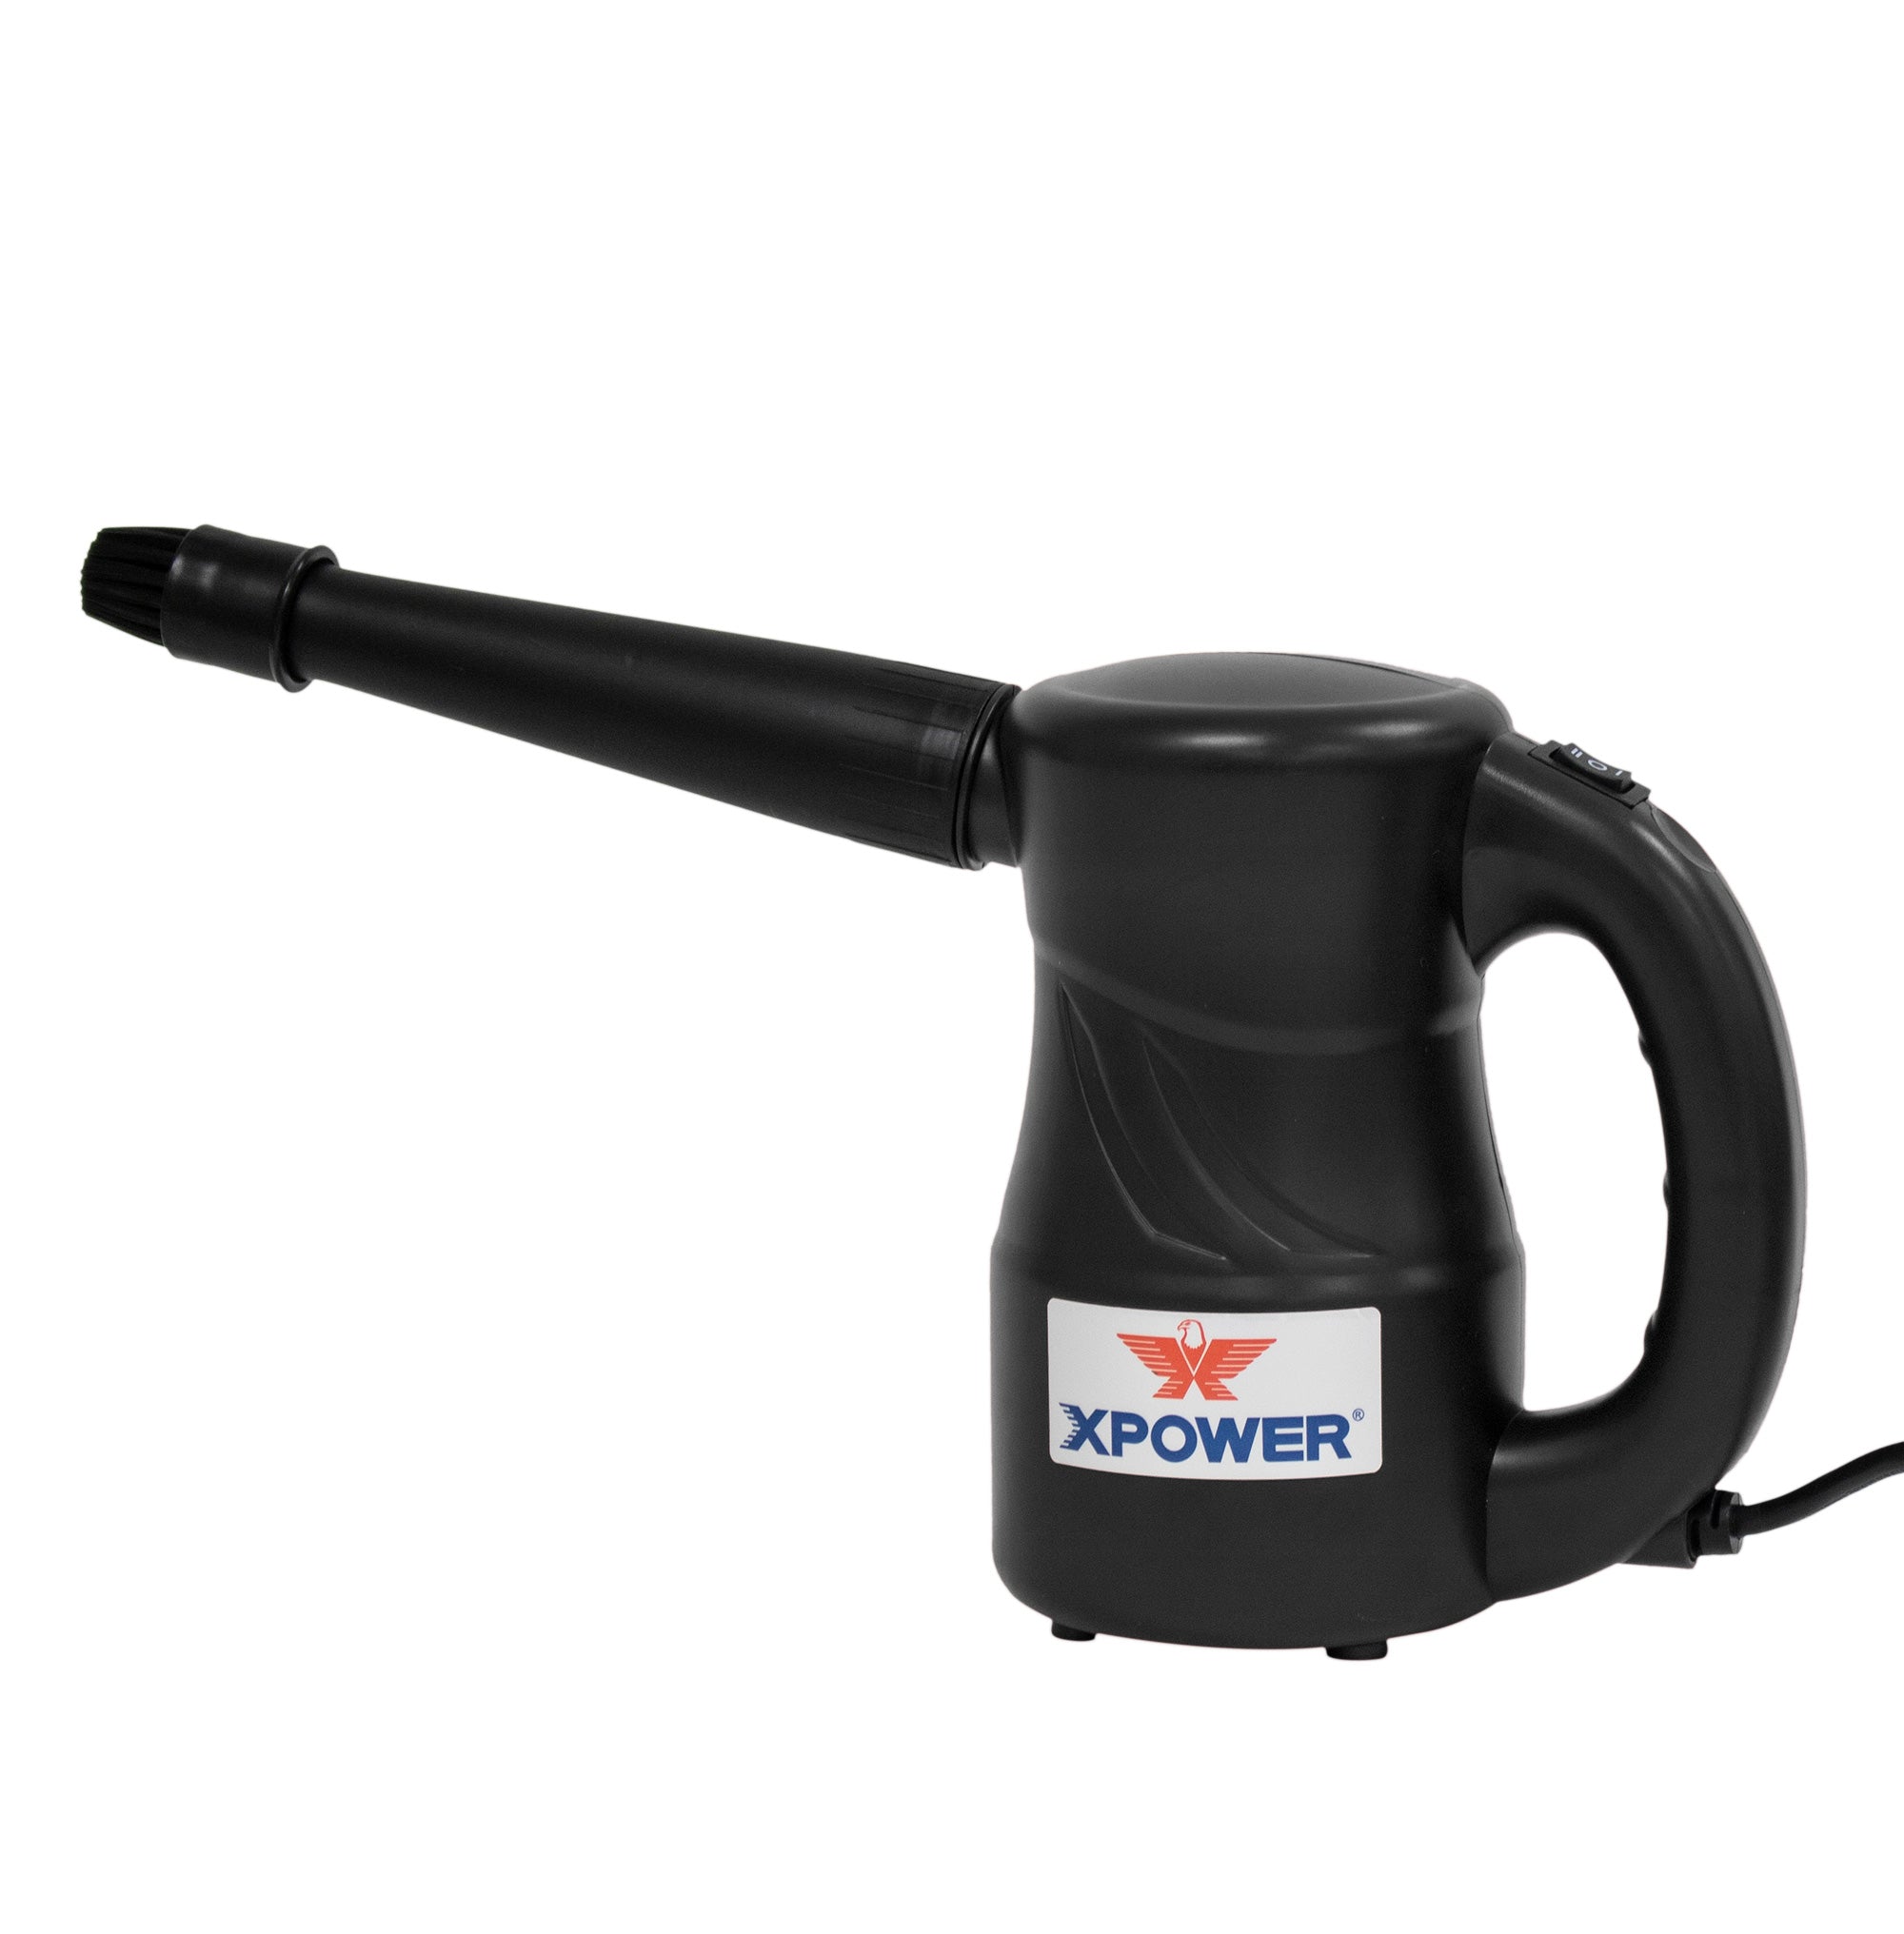 A-2S Electric Duster & Blower (Black) - Airflow Go